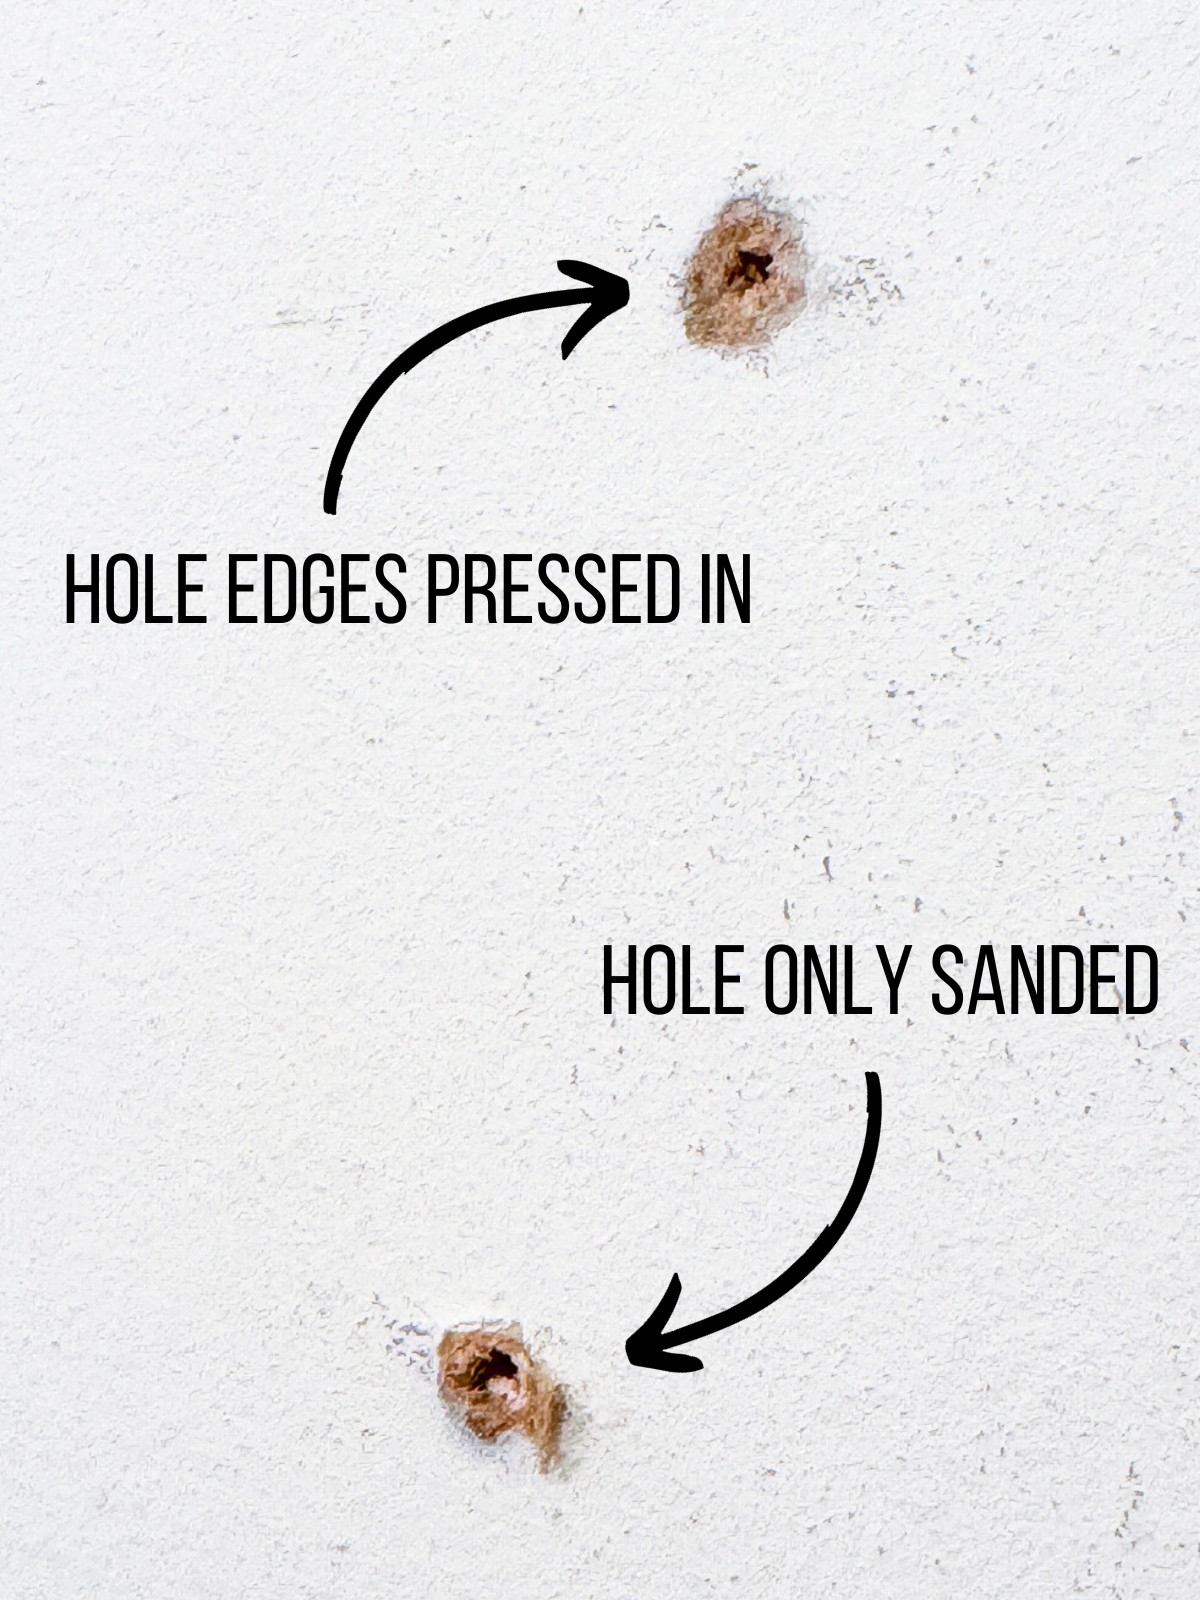 drywall hole edges pressed in vs only sanding the surface